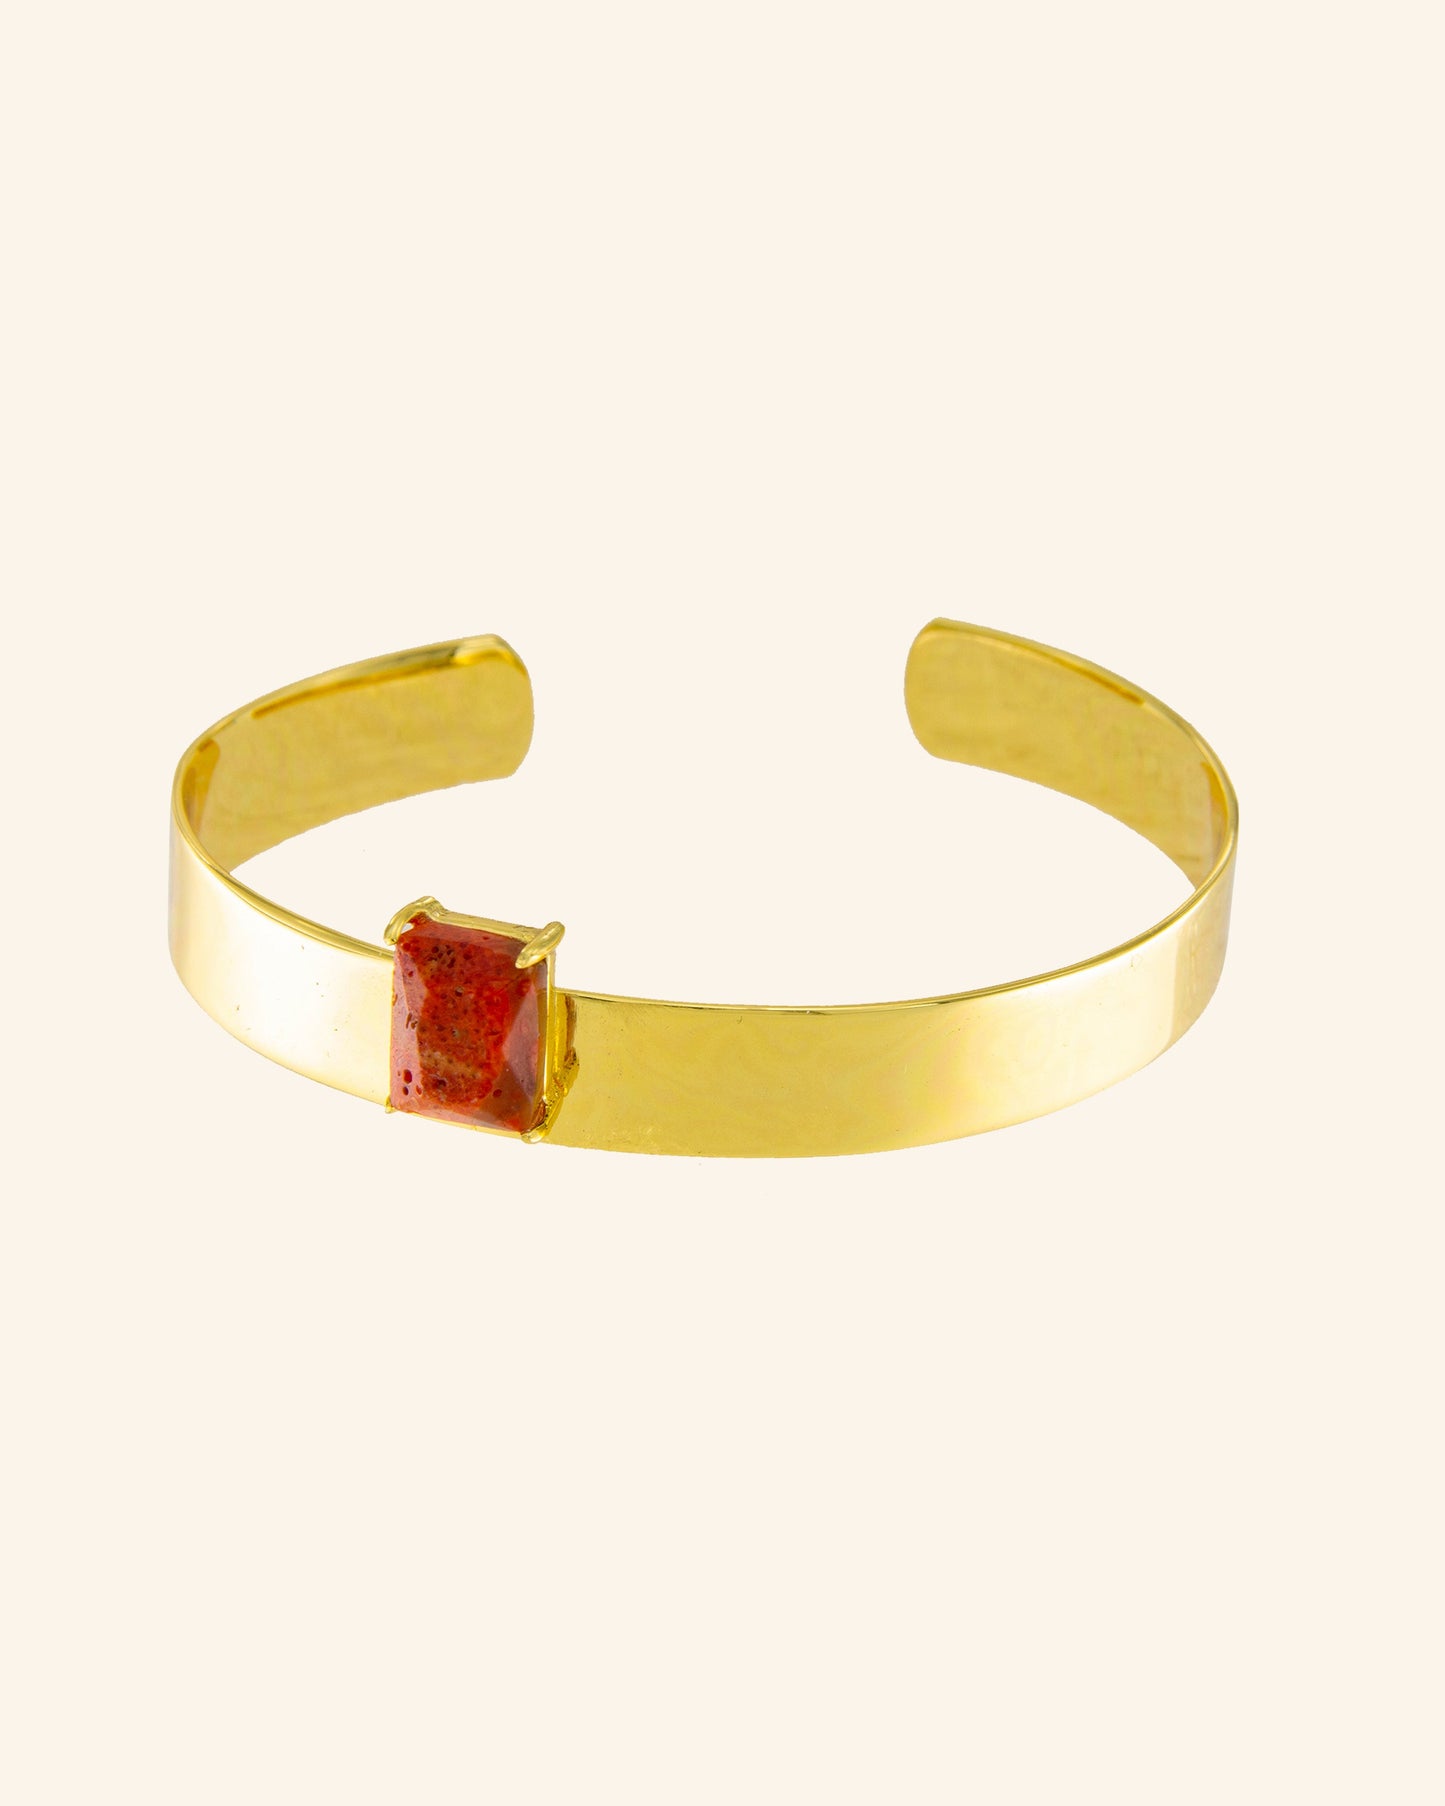 Gabo Bracelet with Red Coral